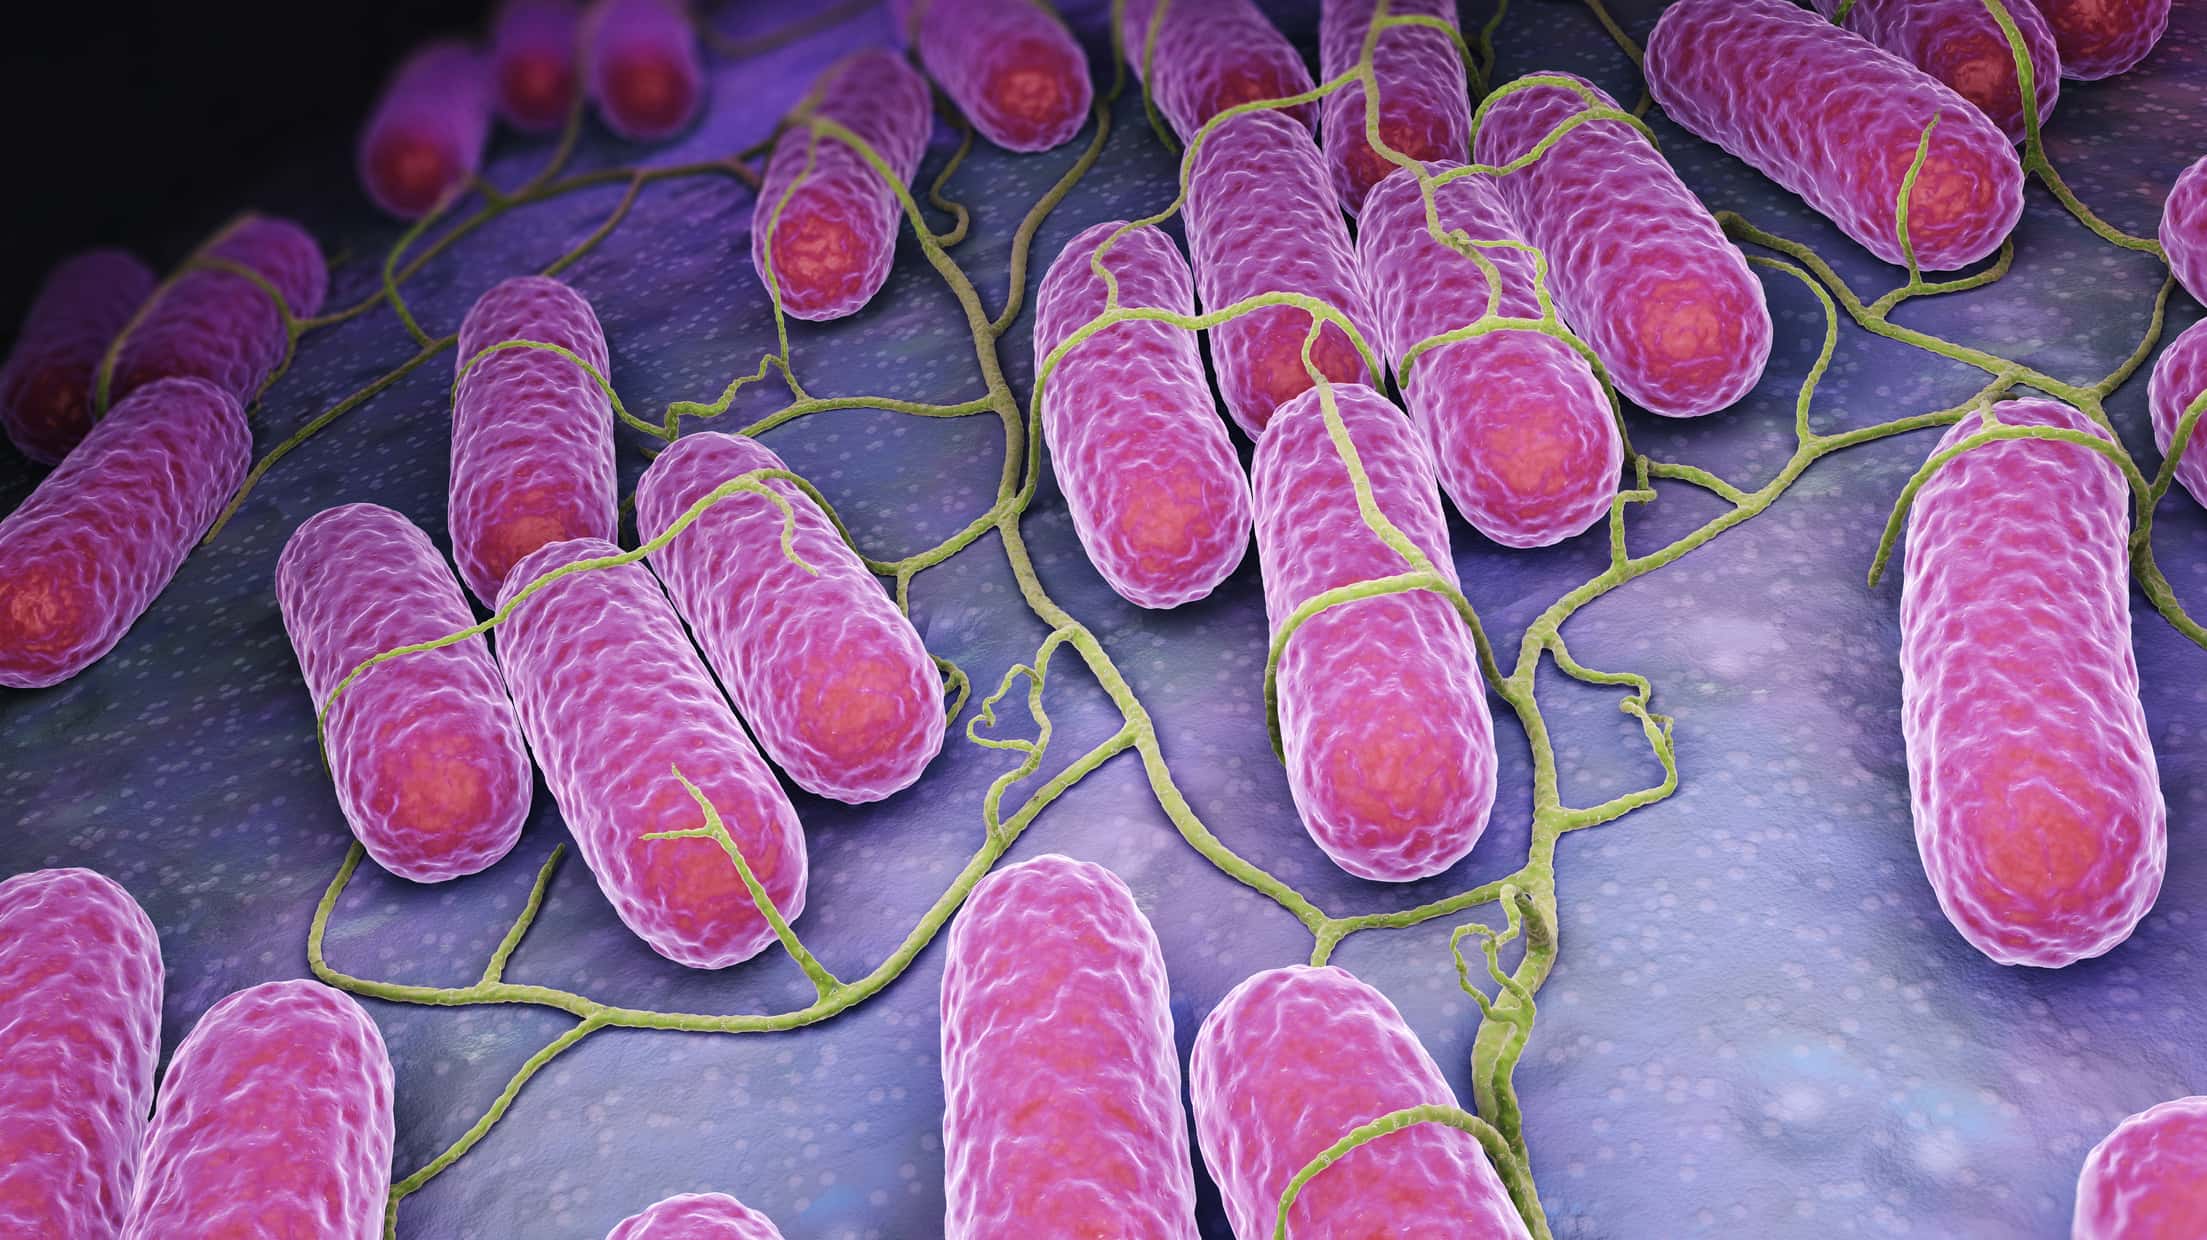 What to know about Salmonella after recent outbreaks have made hundreds